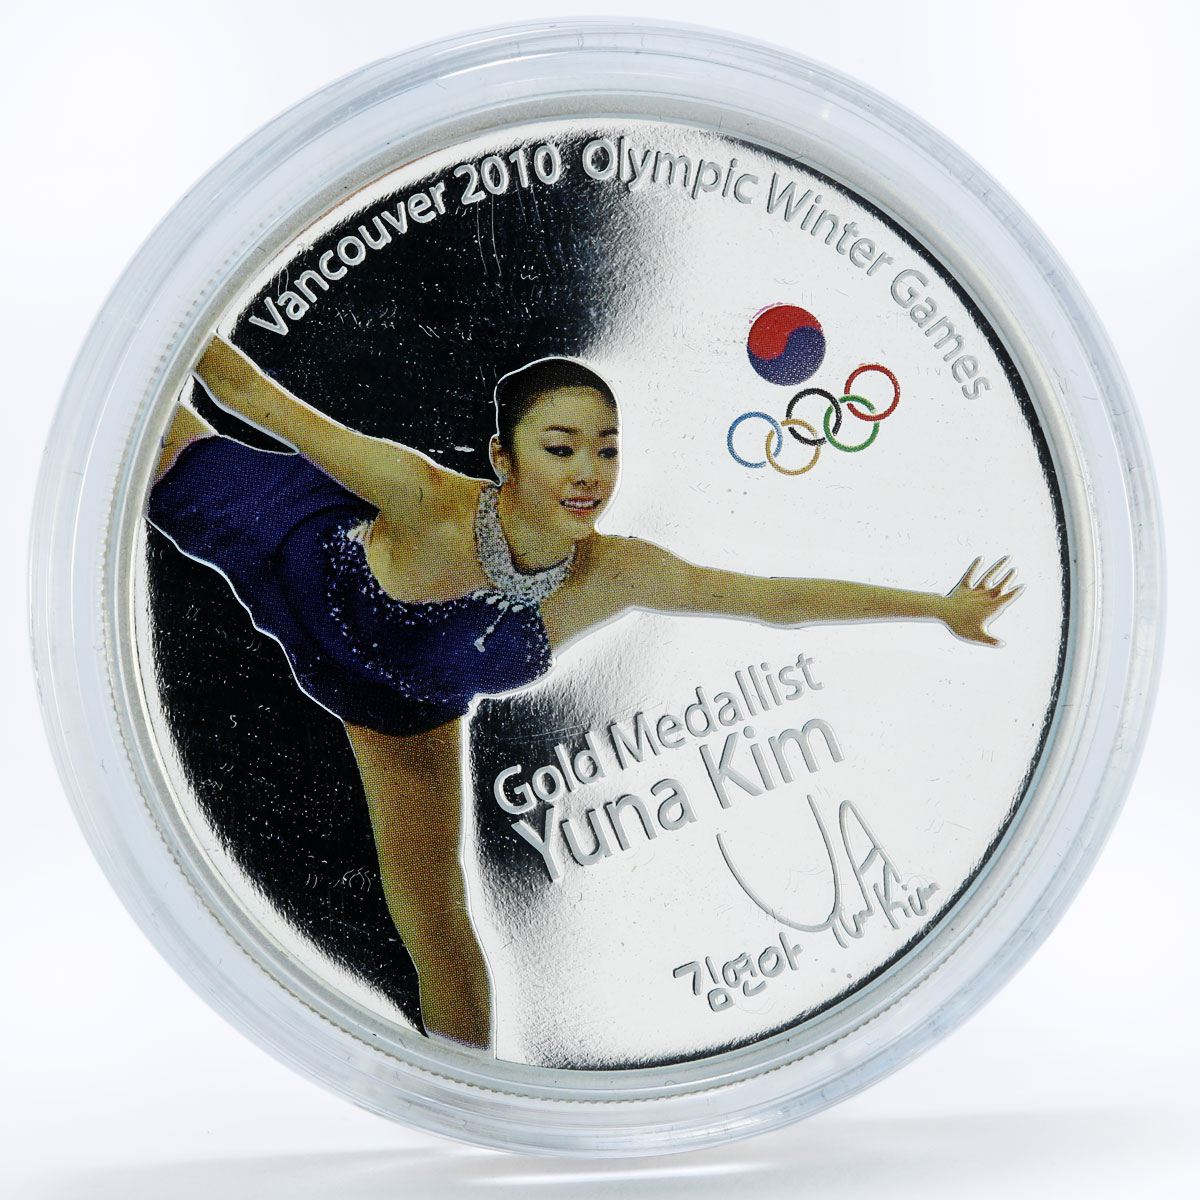 Tuvalu 1 dollar Yuna Kim Olympic Figure Skating colored silver proof coin 2010